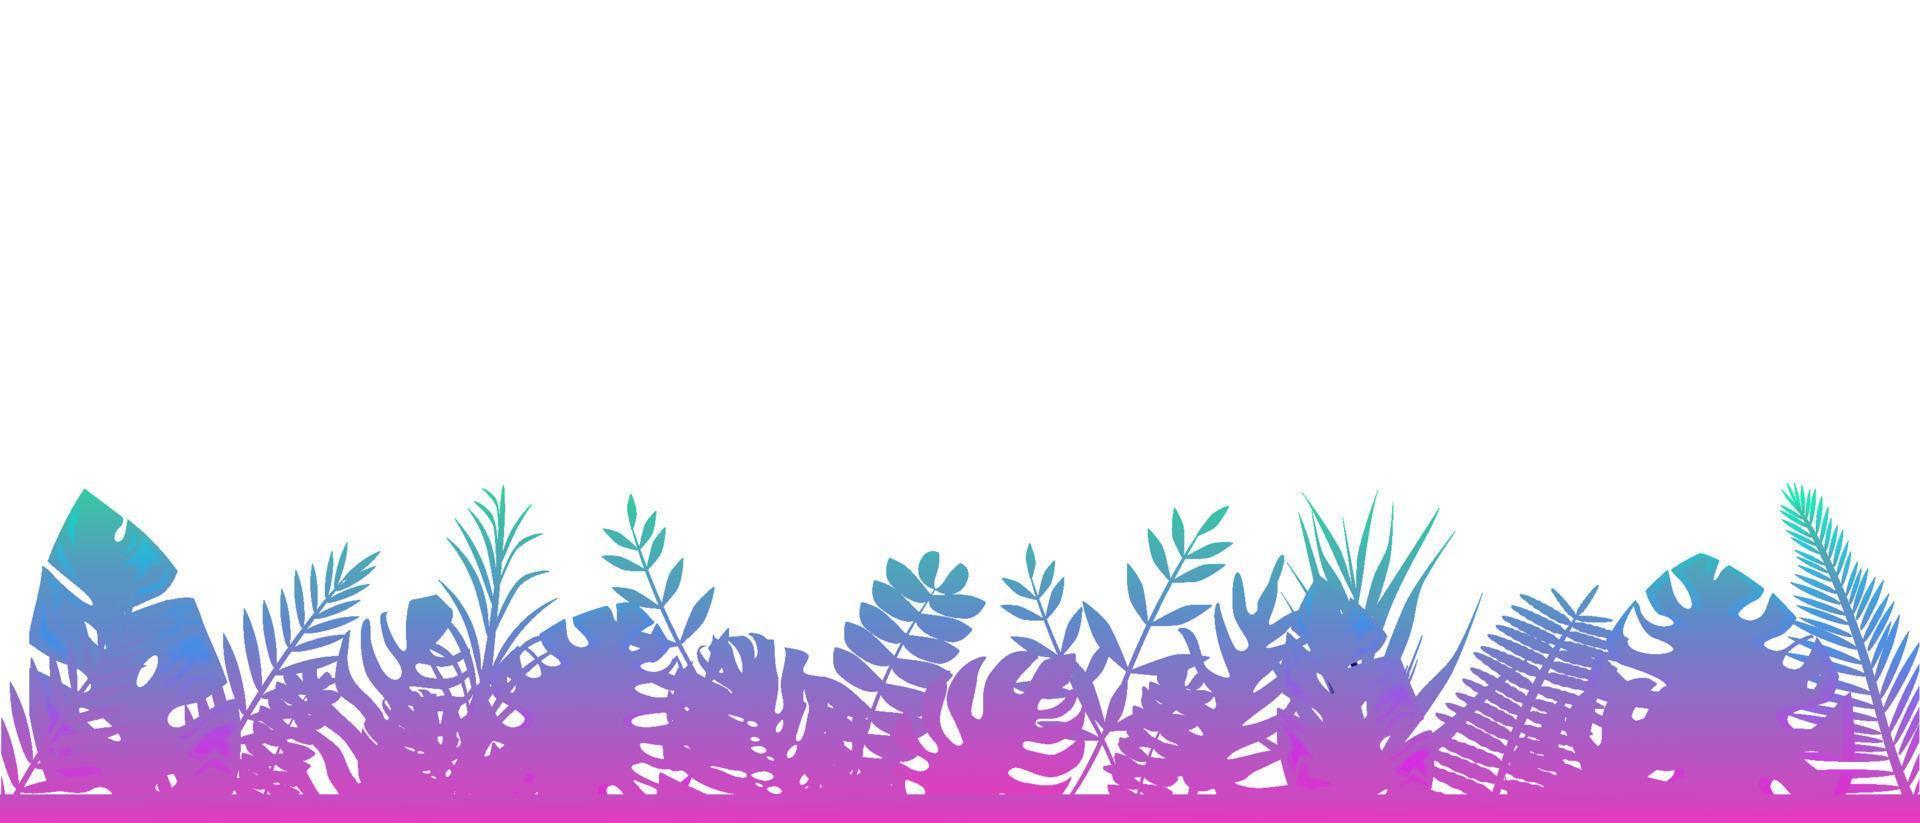 Fern background blue pink. Decoration horizontal rainforests floral botanical background with elegant tenderly leaves of fern wild natural lawn in the rays of the rising vector sun.